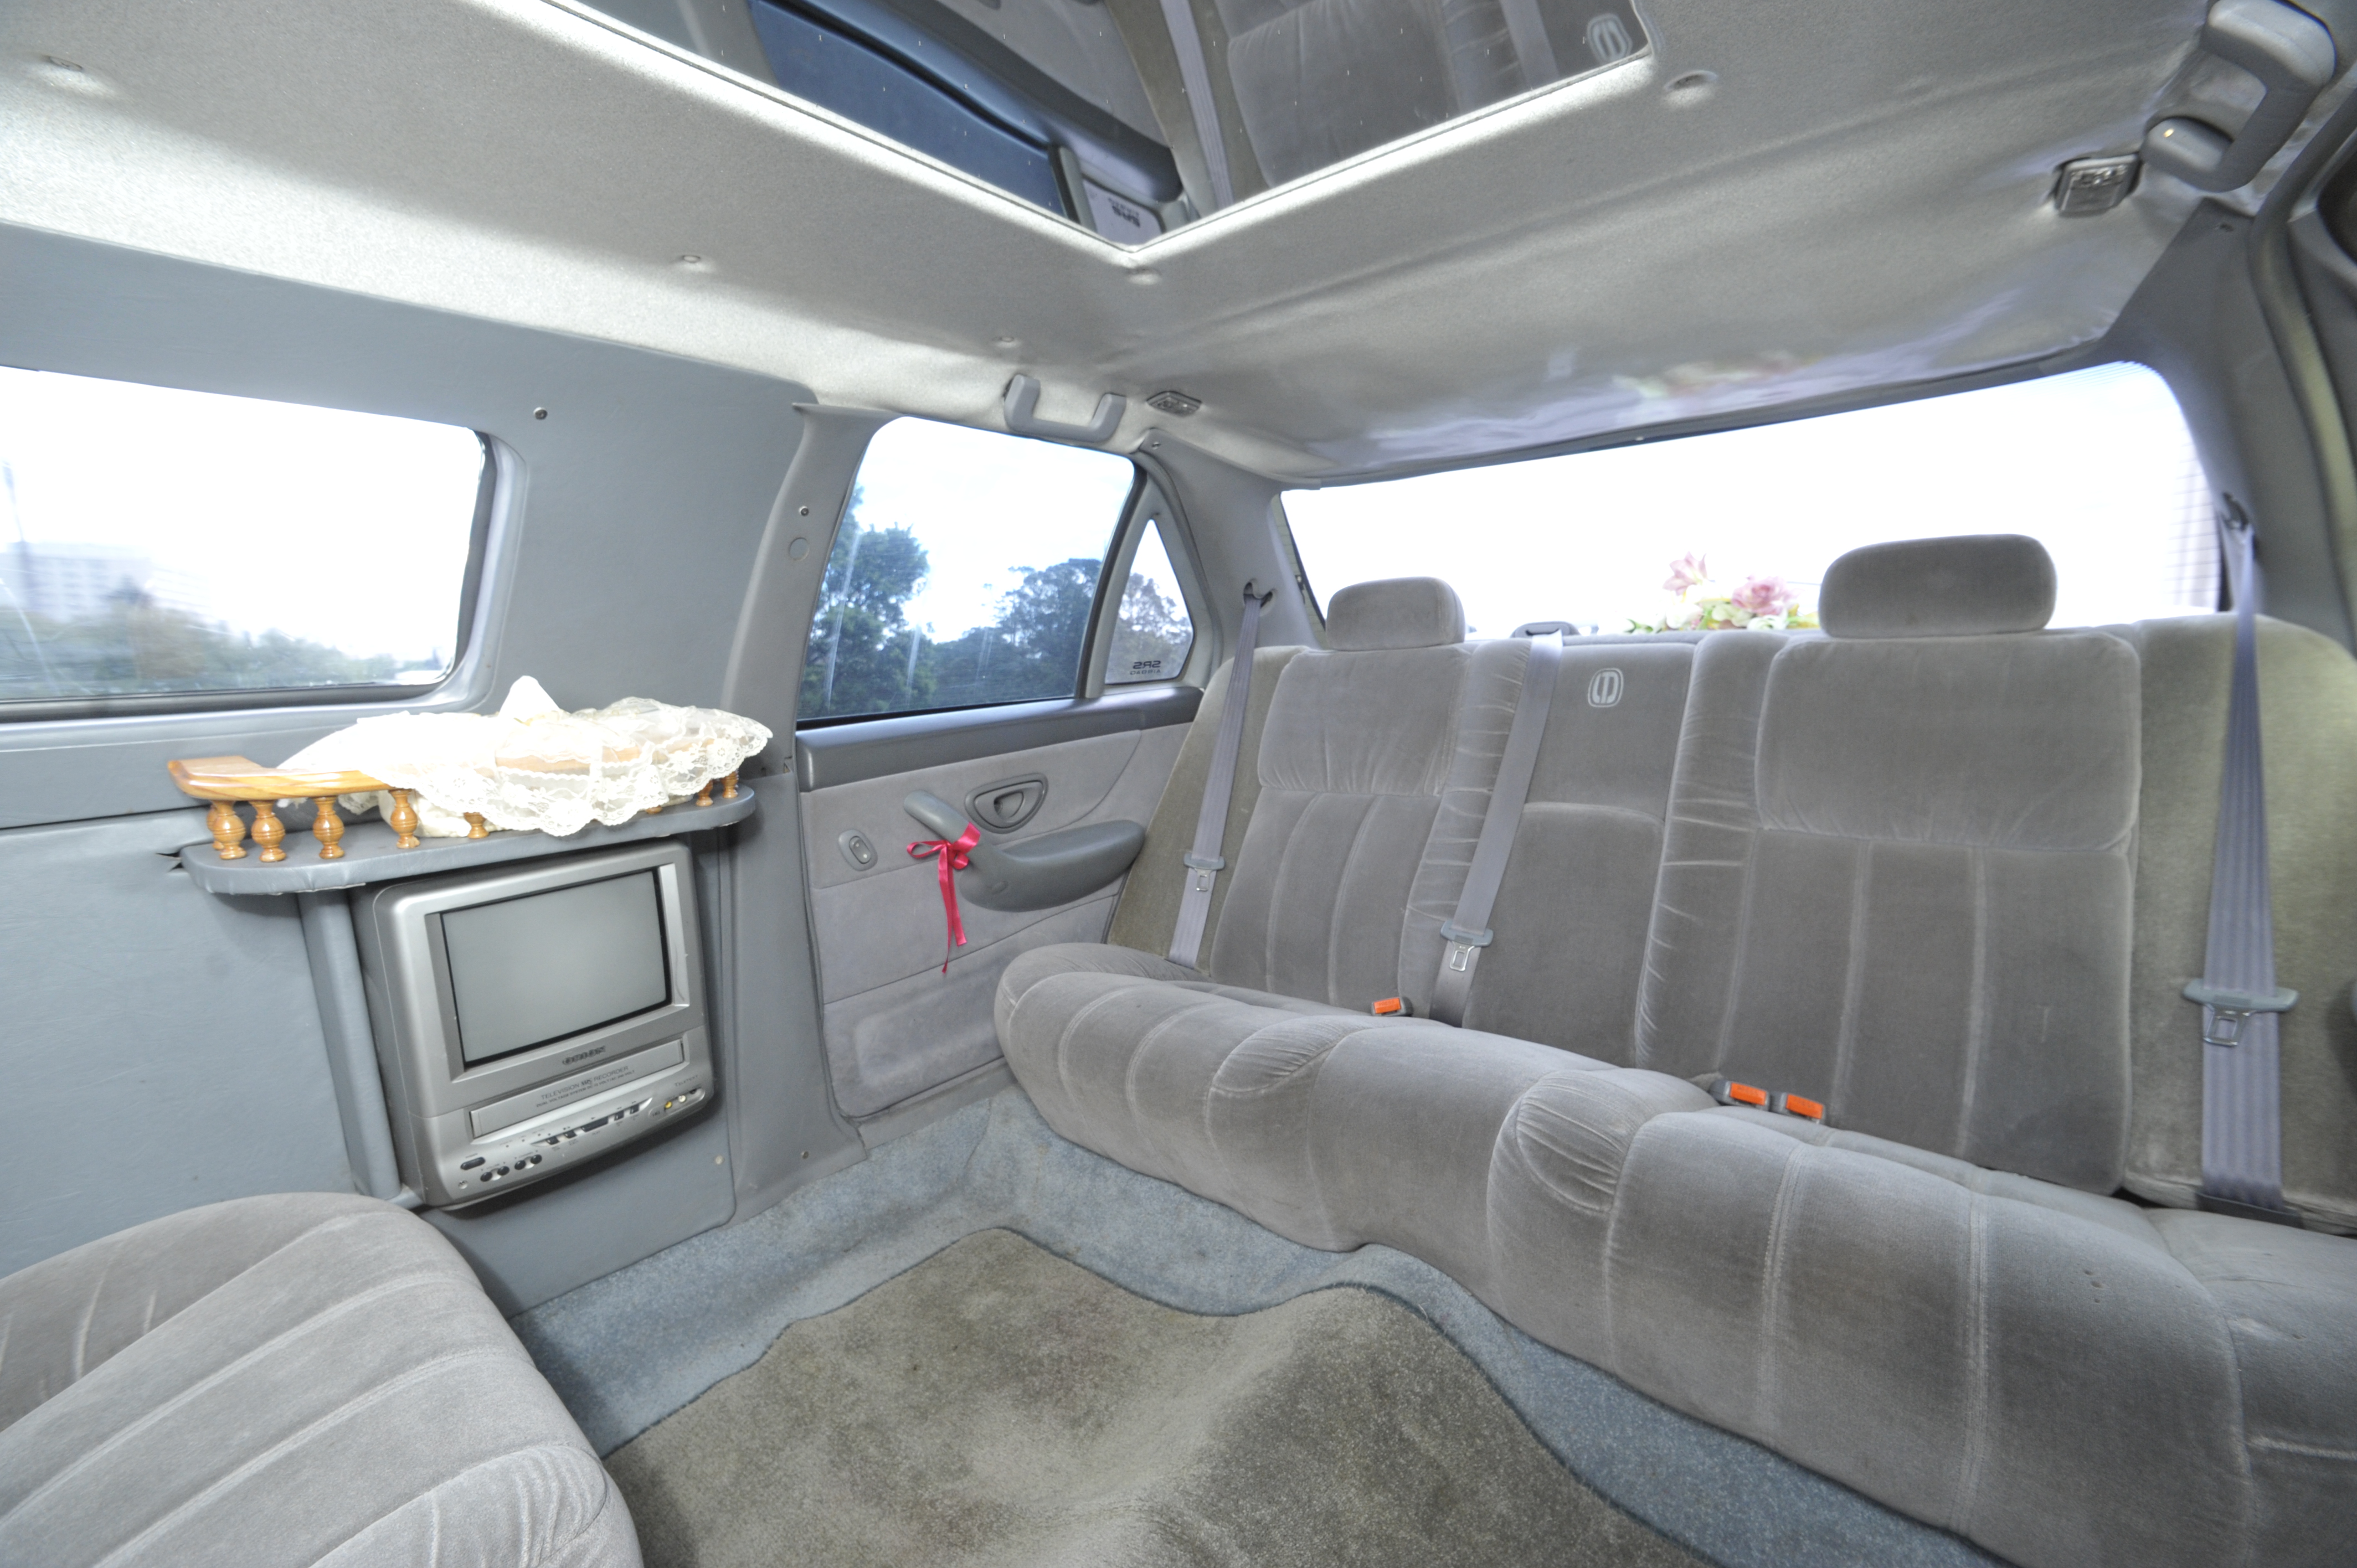 6 Seater Ford Limousine